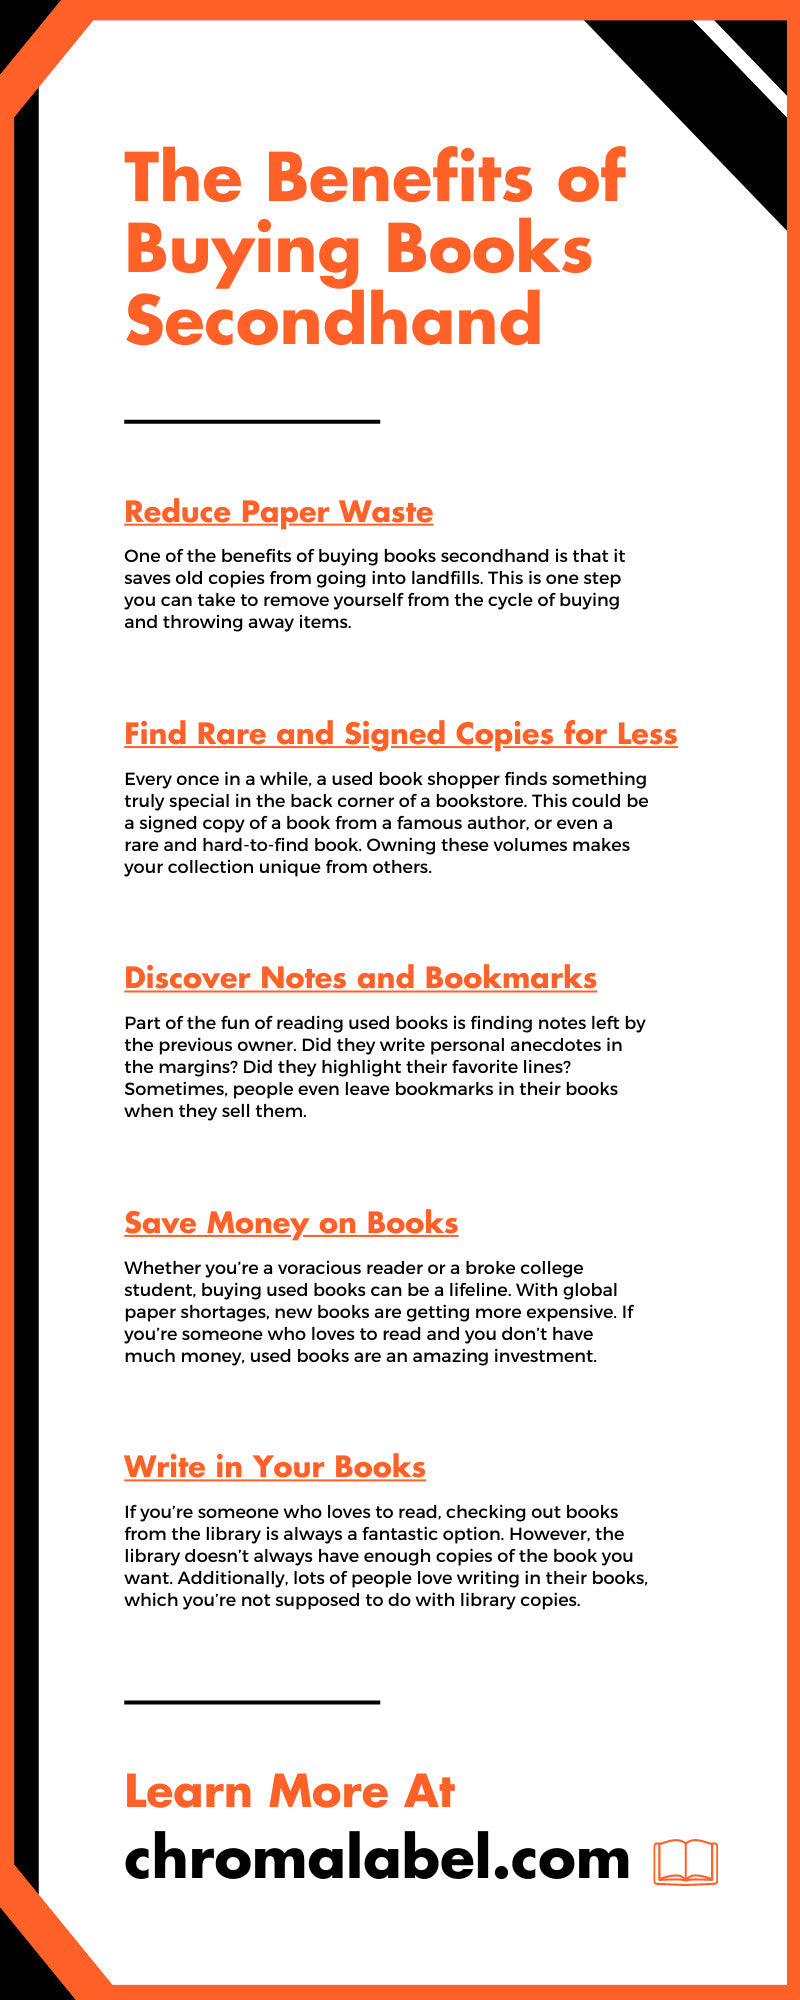 How to Save Money Buying Books on